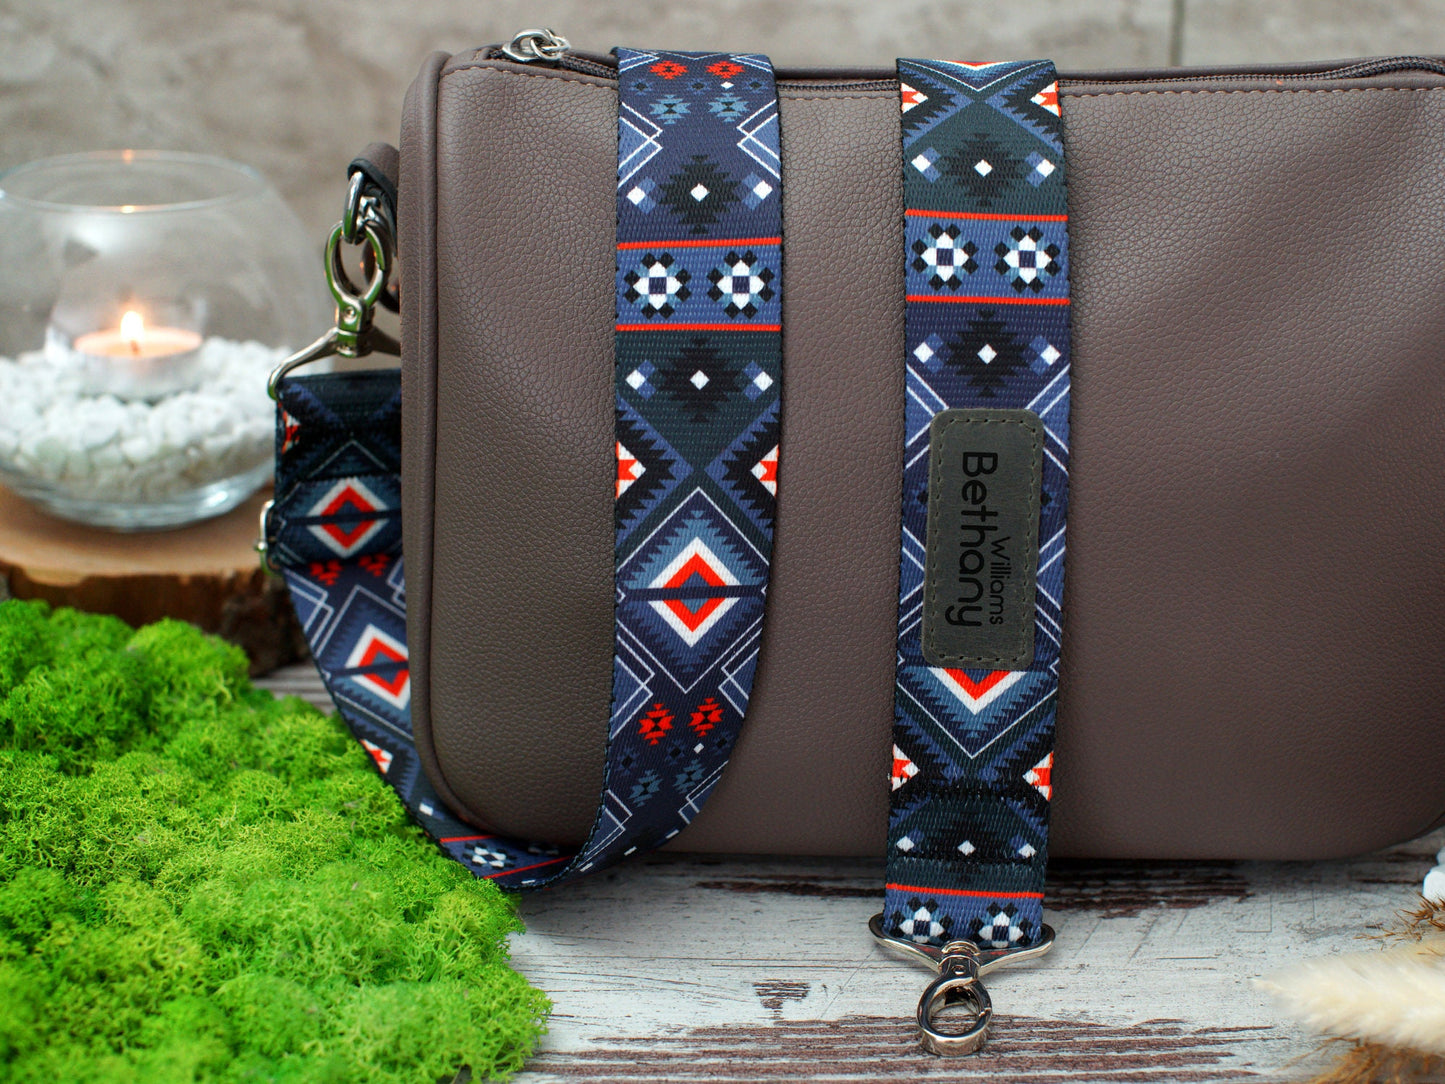 Personalized Bag Strap - 4 Different Pattern Available – Budka Shop